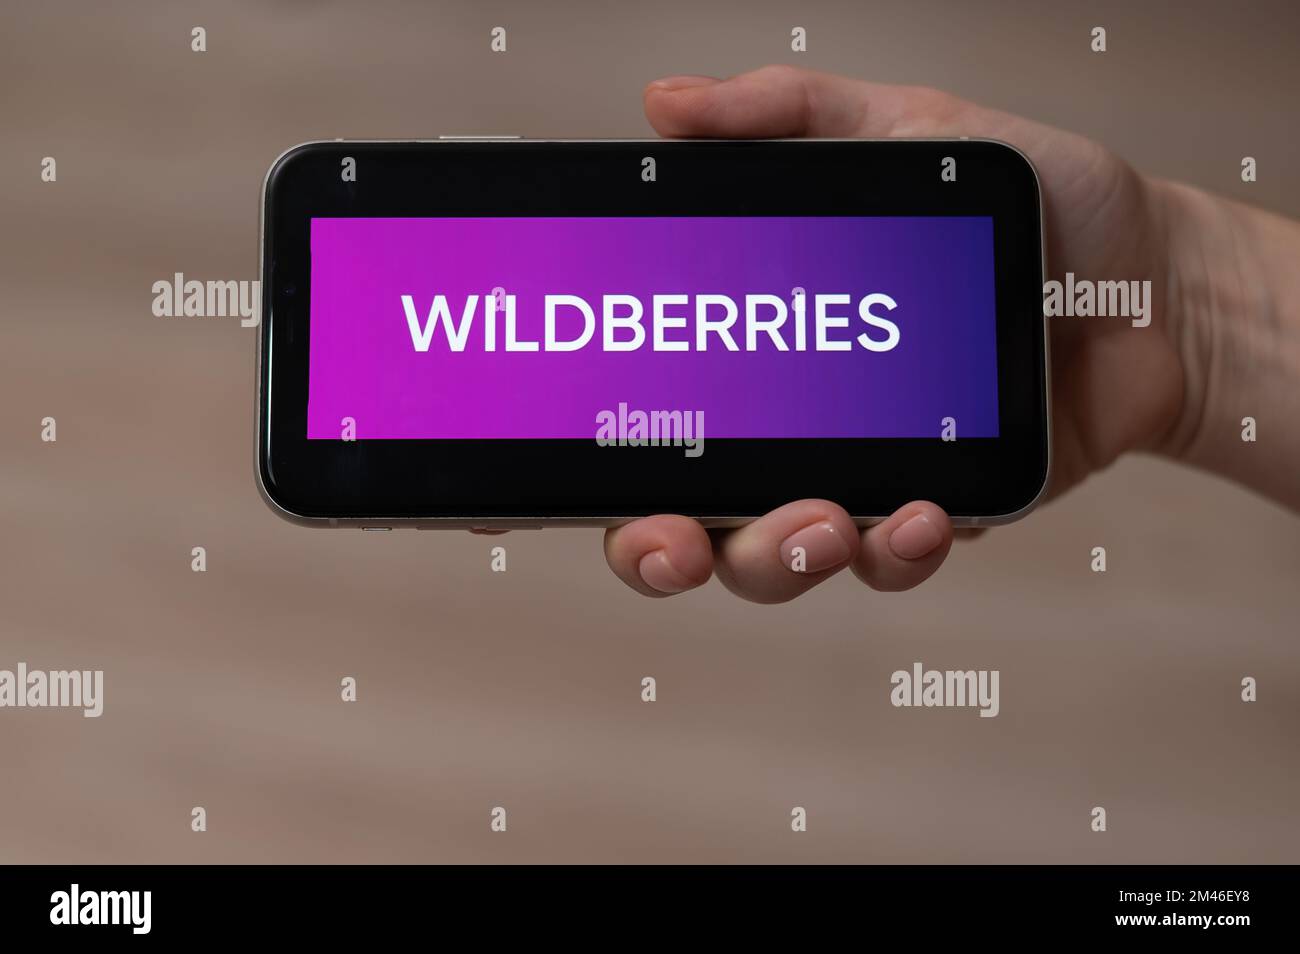 December 3, 2022, Almaty, Kazakhstan: wildberries logo on the screen of a smartphone in a female hand.  Stock Photo